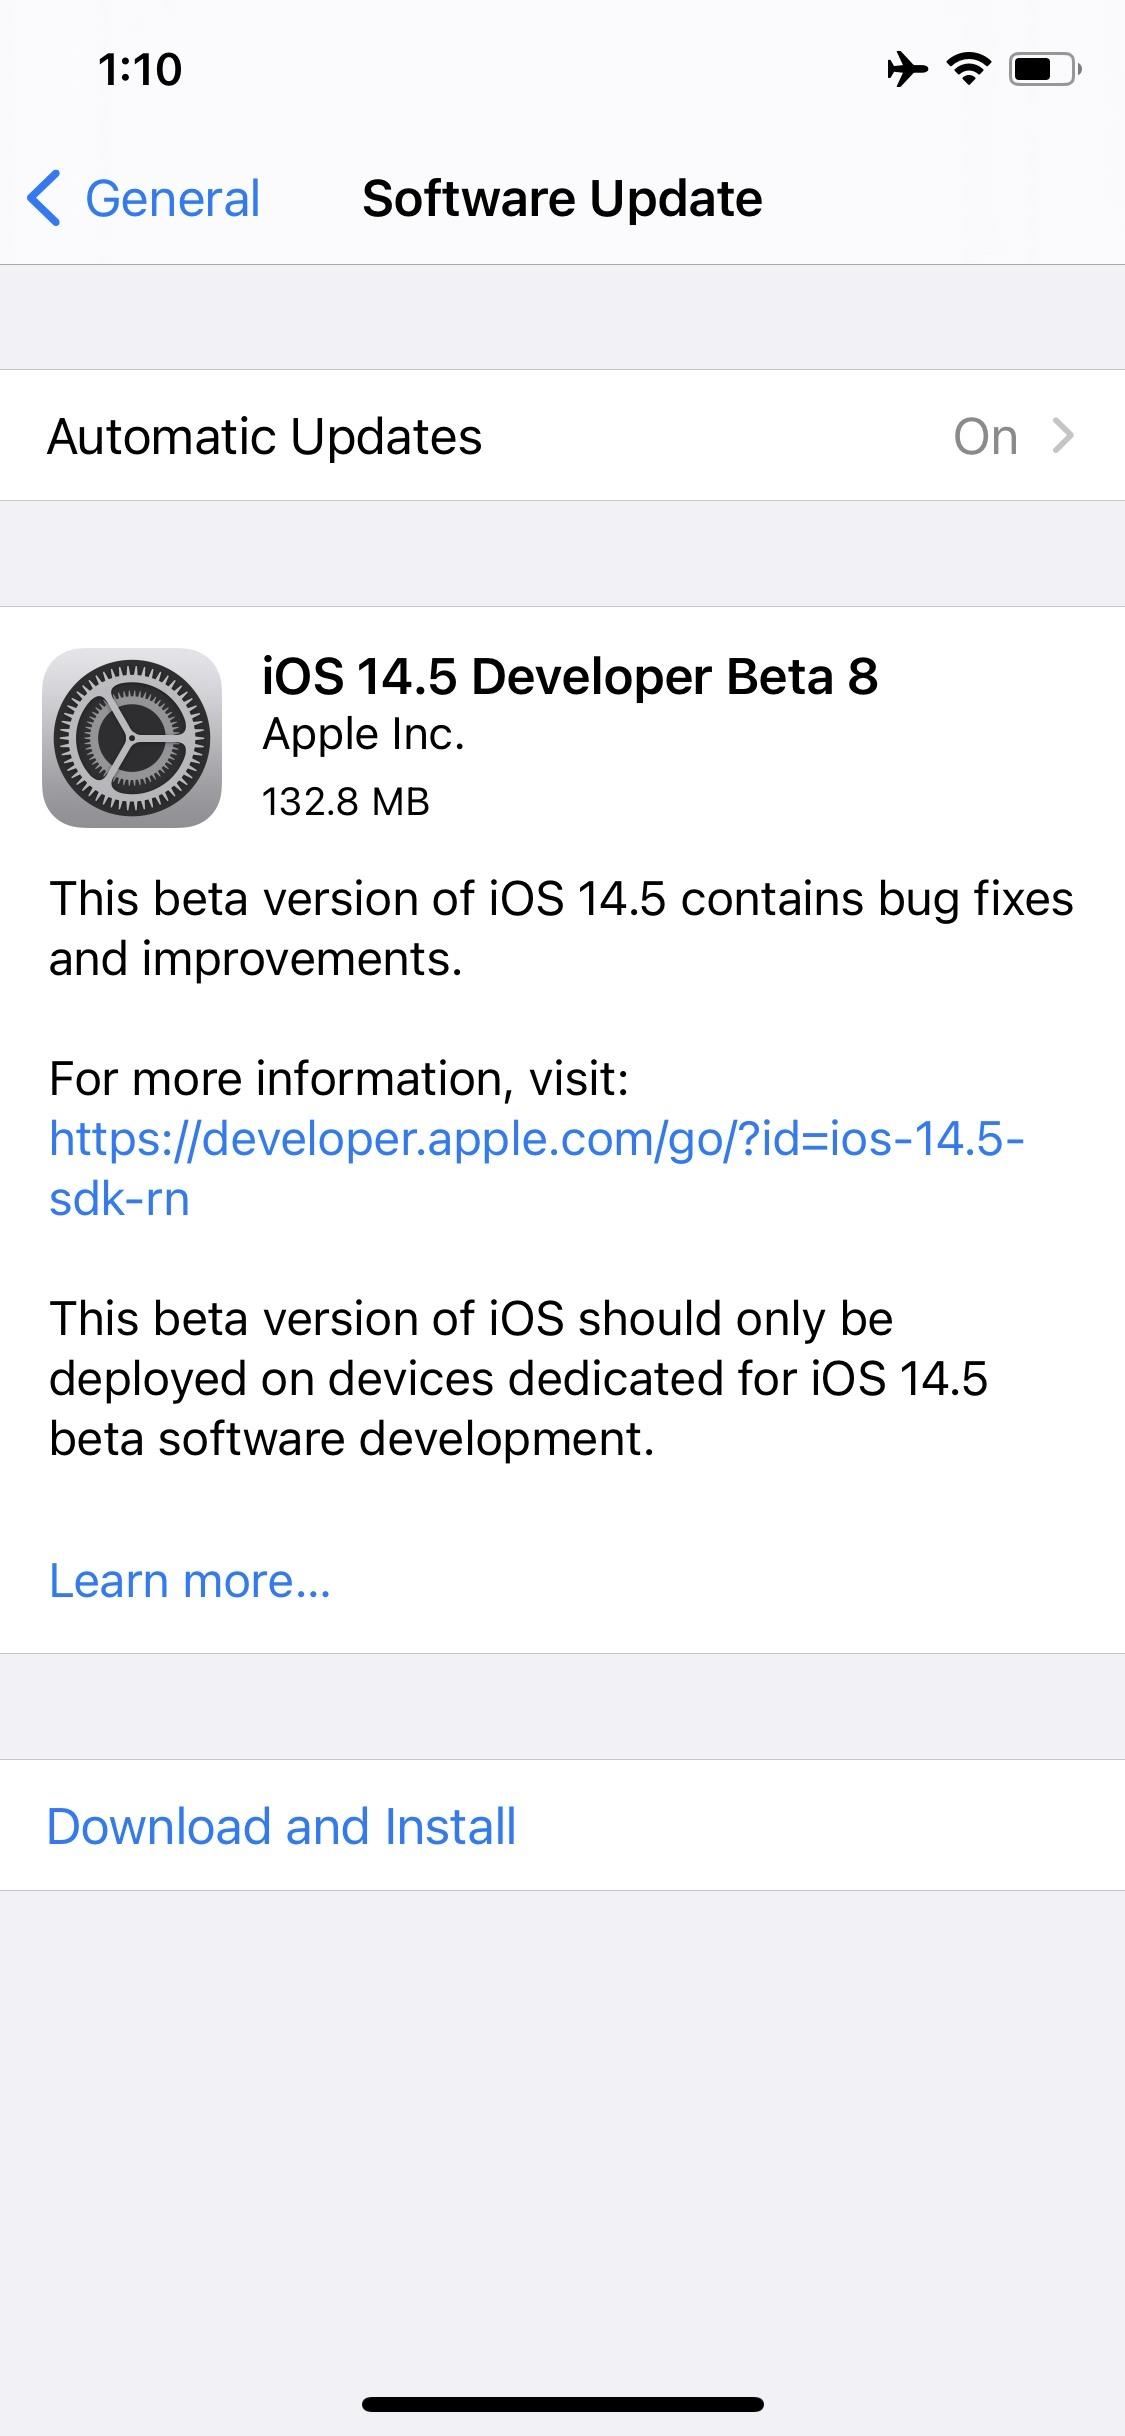 Apple Releases iOS 14.5 Beta 8 to Developers